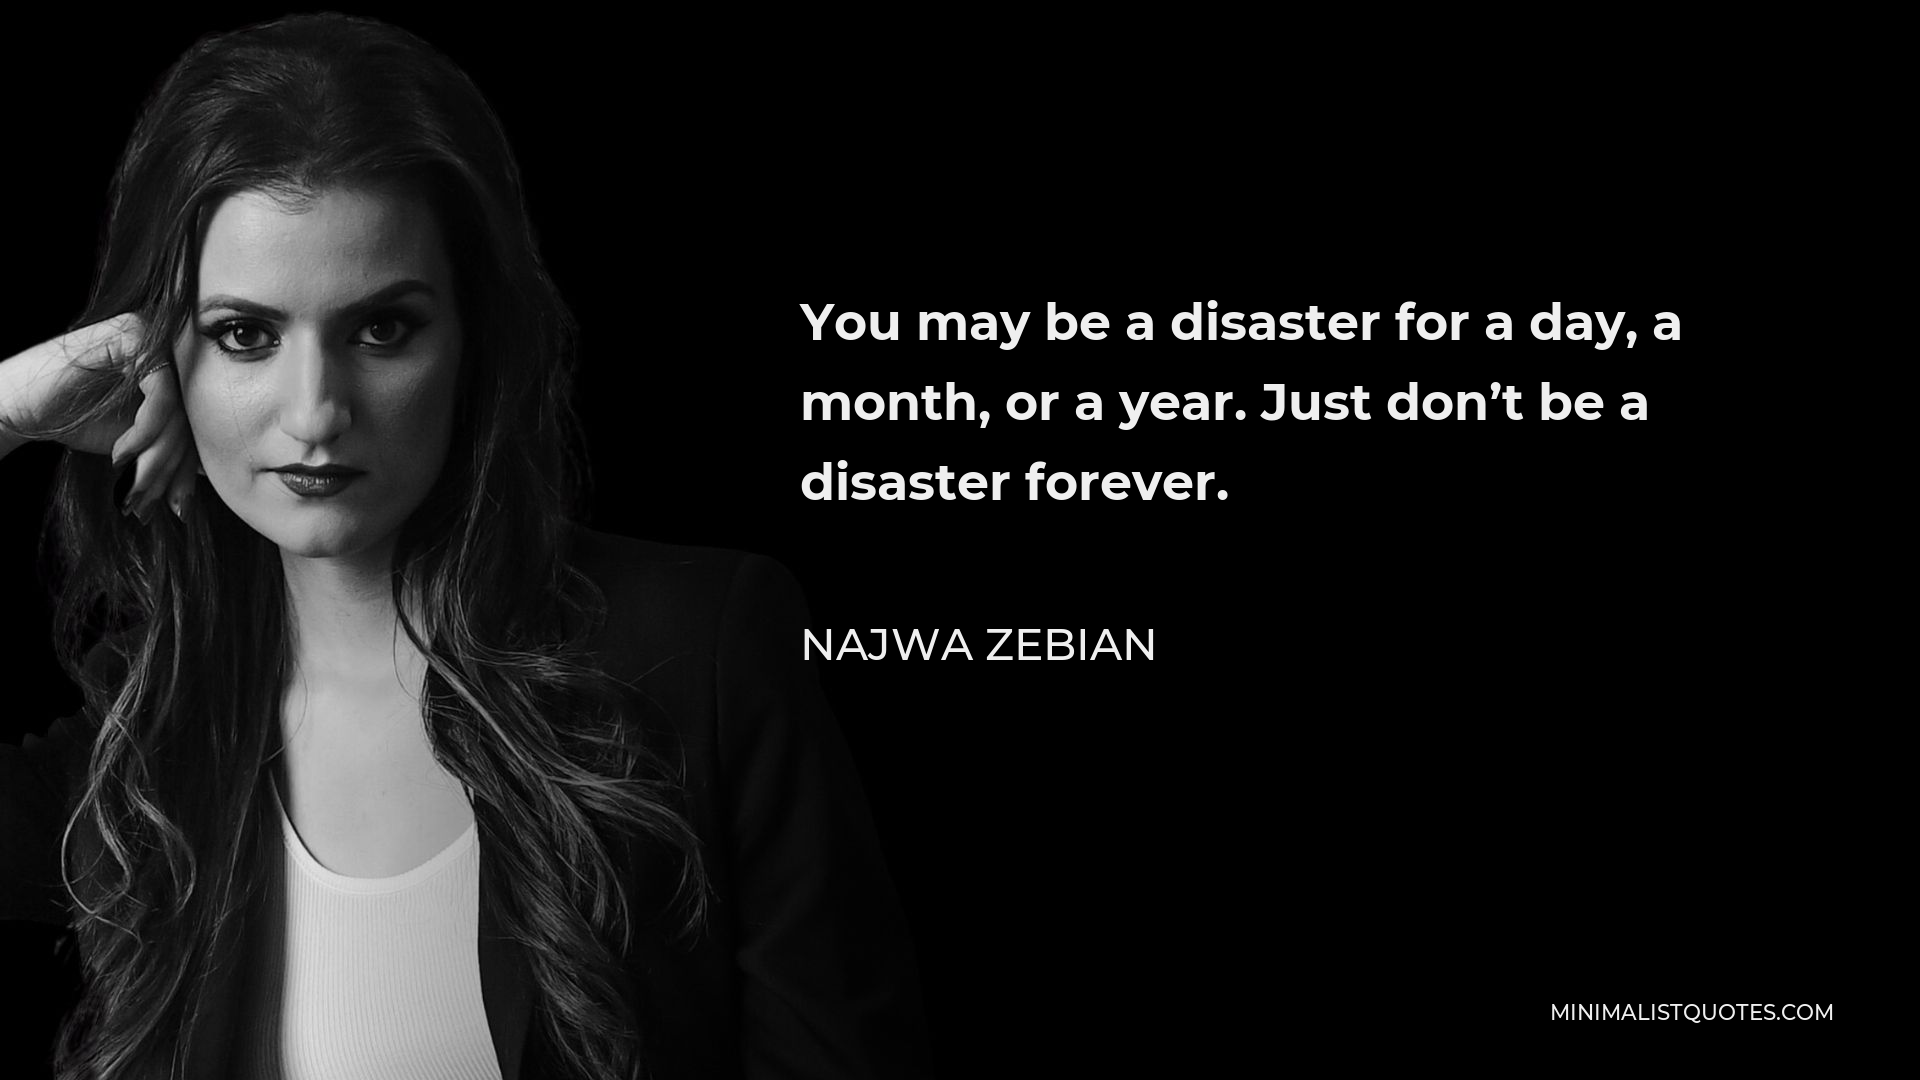 Najwa Zebian Quote - You may be a disaster for a day, a month, or a year. Just don’t be a disaster forever.